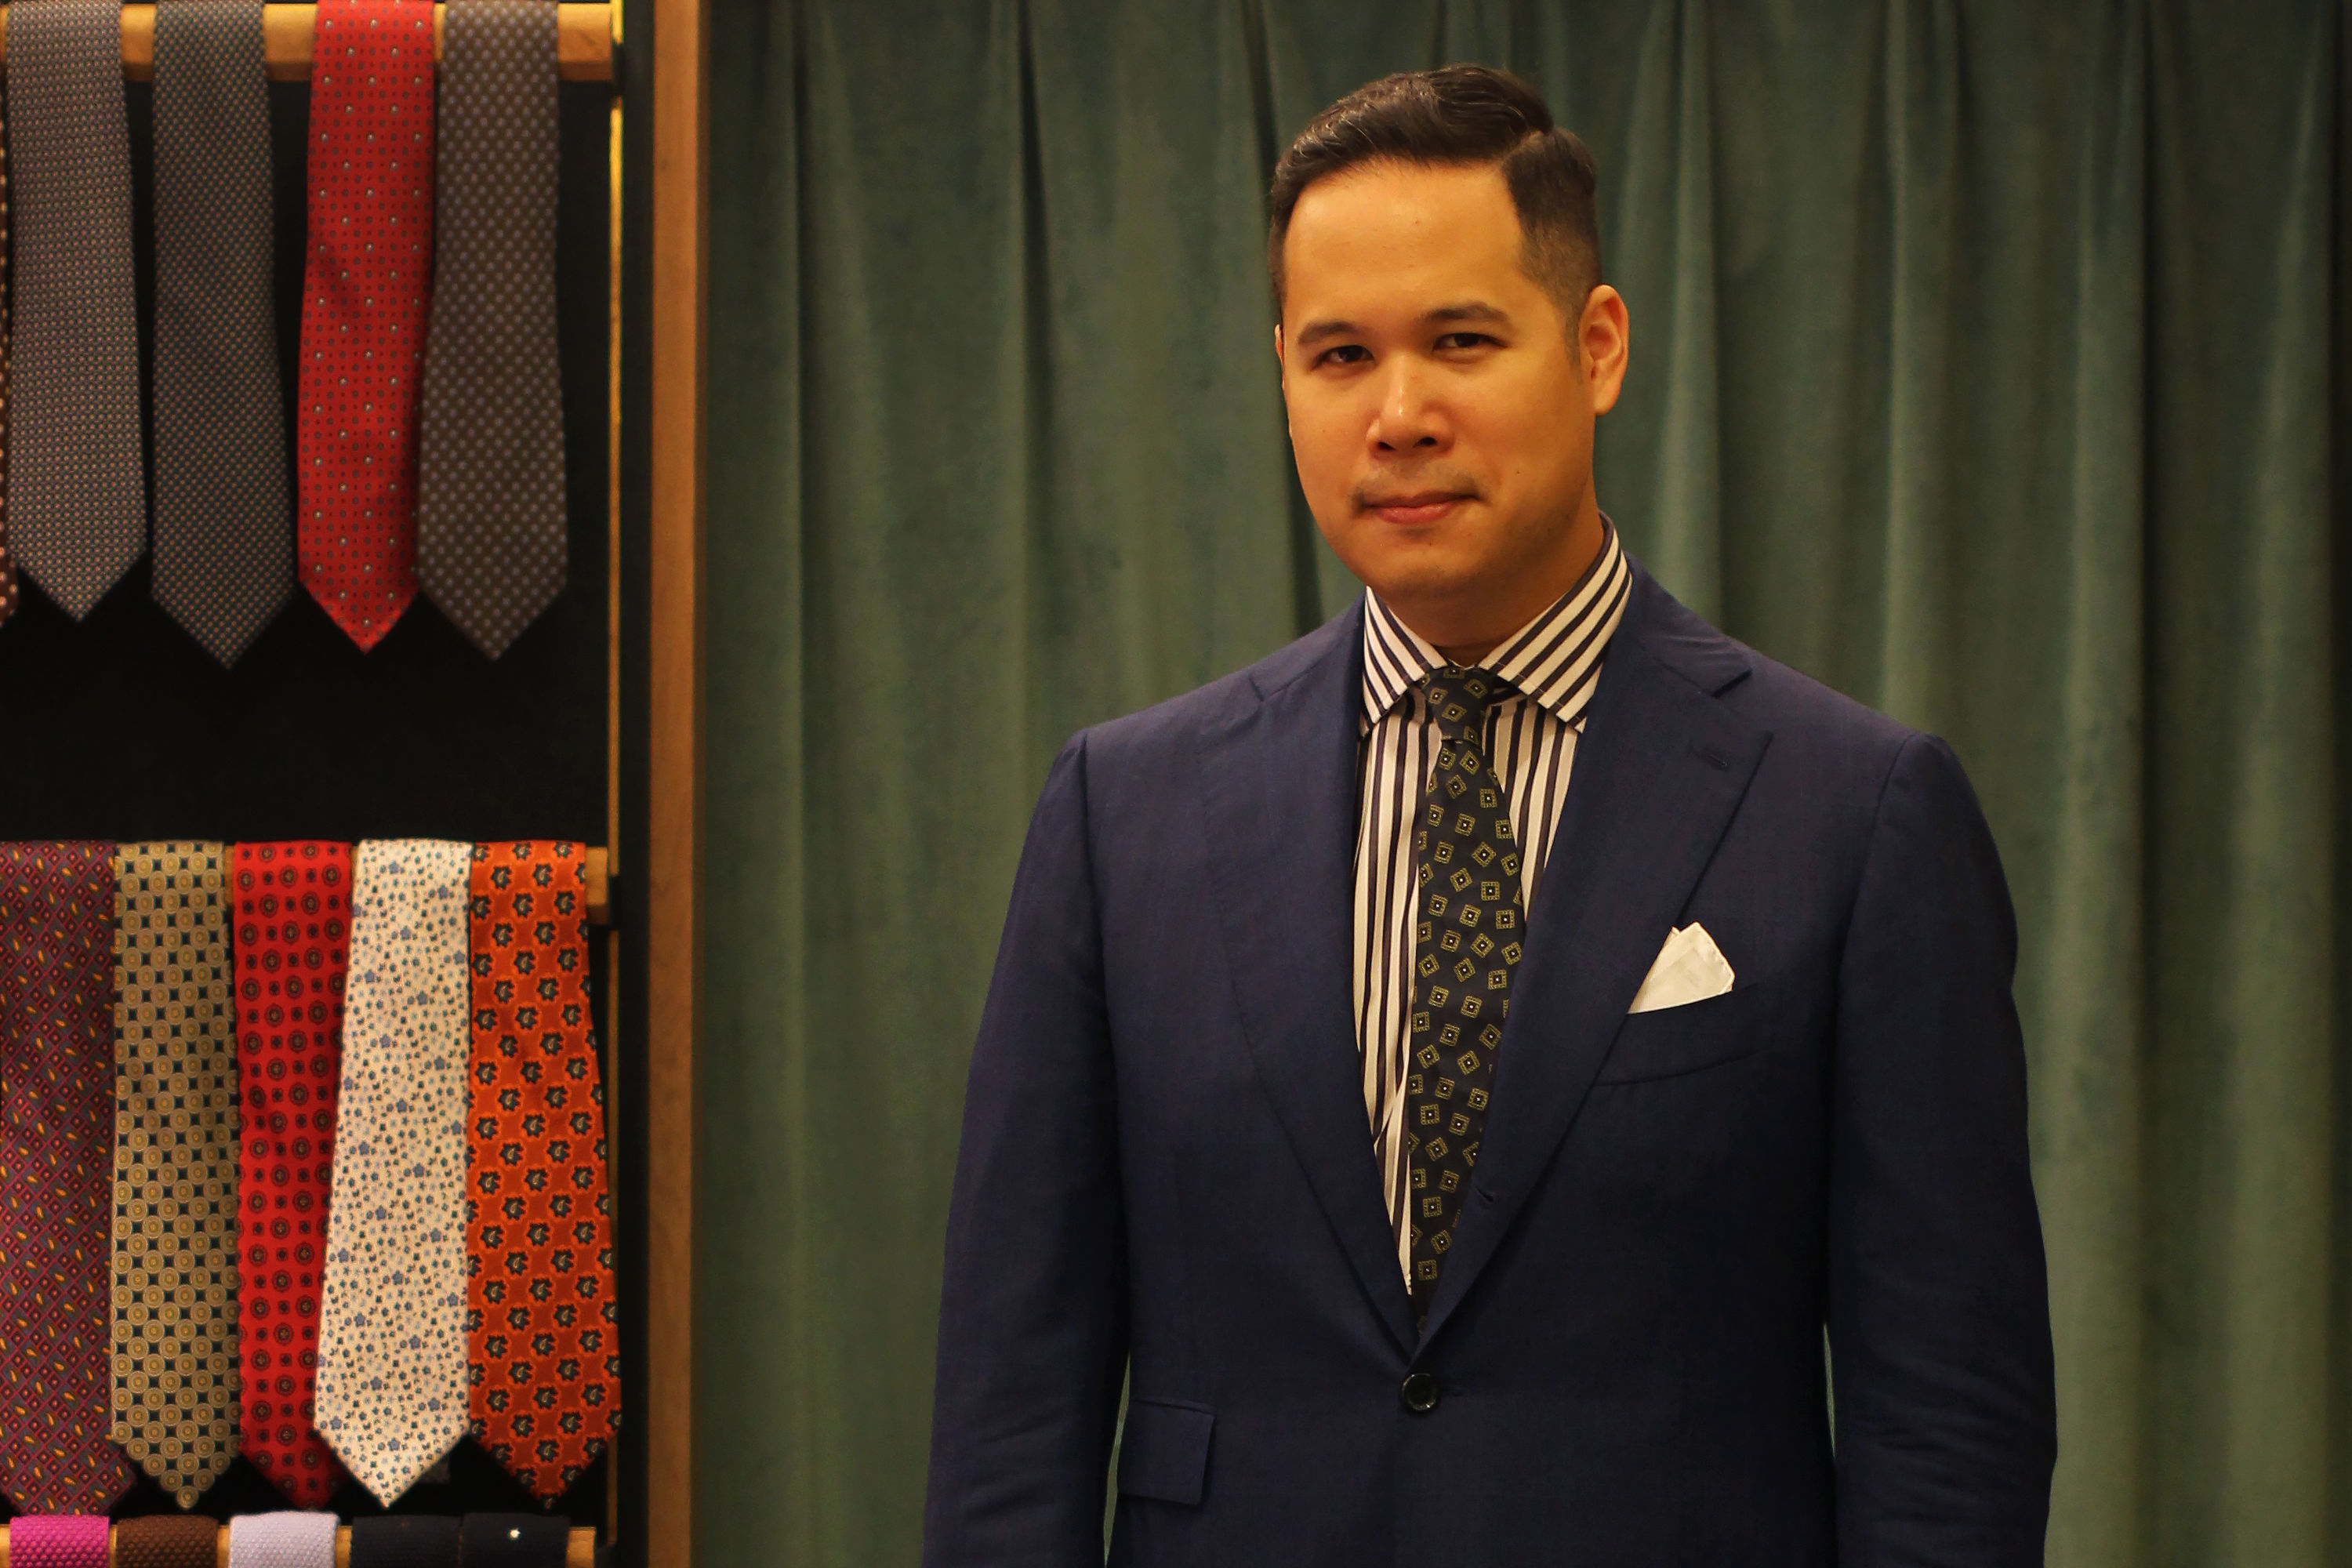 How to Succeed: Brandon Chau, co-founder of Attire House